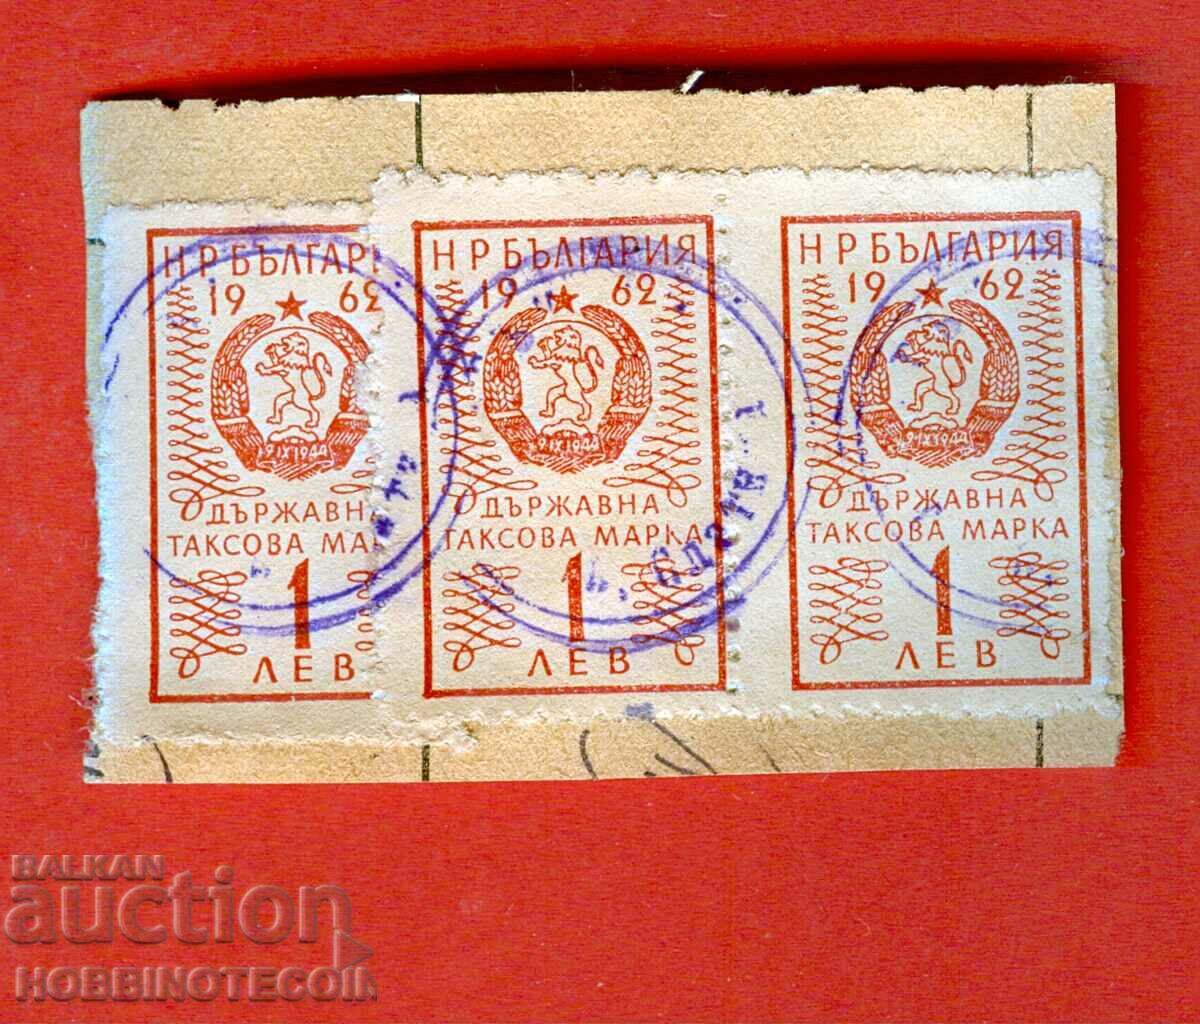 BULGARIA TIMBRIE FISCALE TIMBARA FISCALA 3 x 1 Lev - 1962